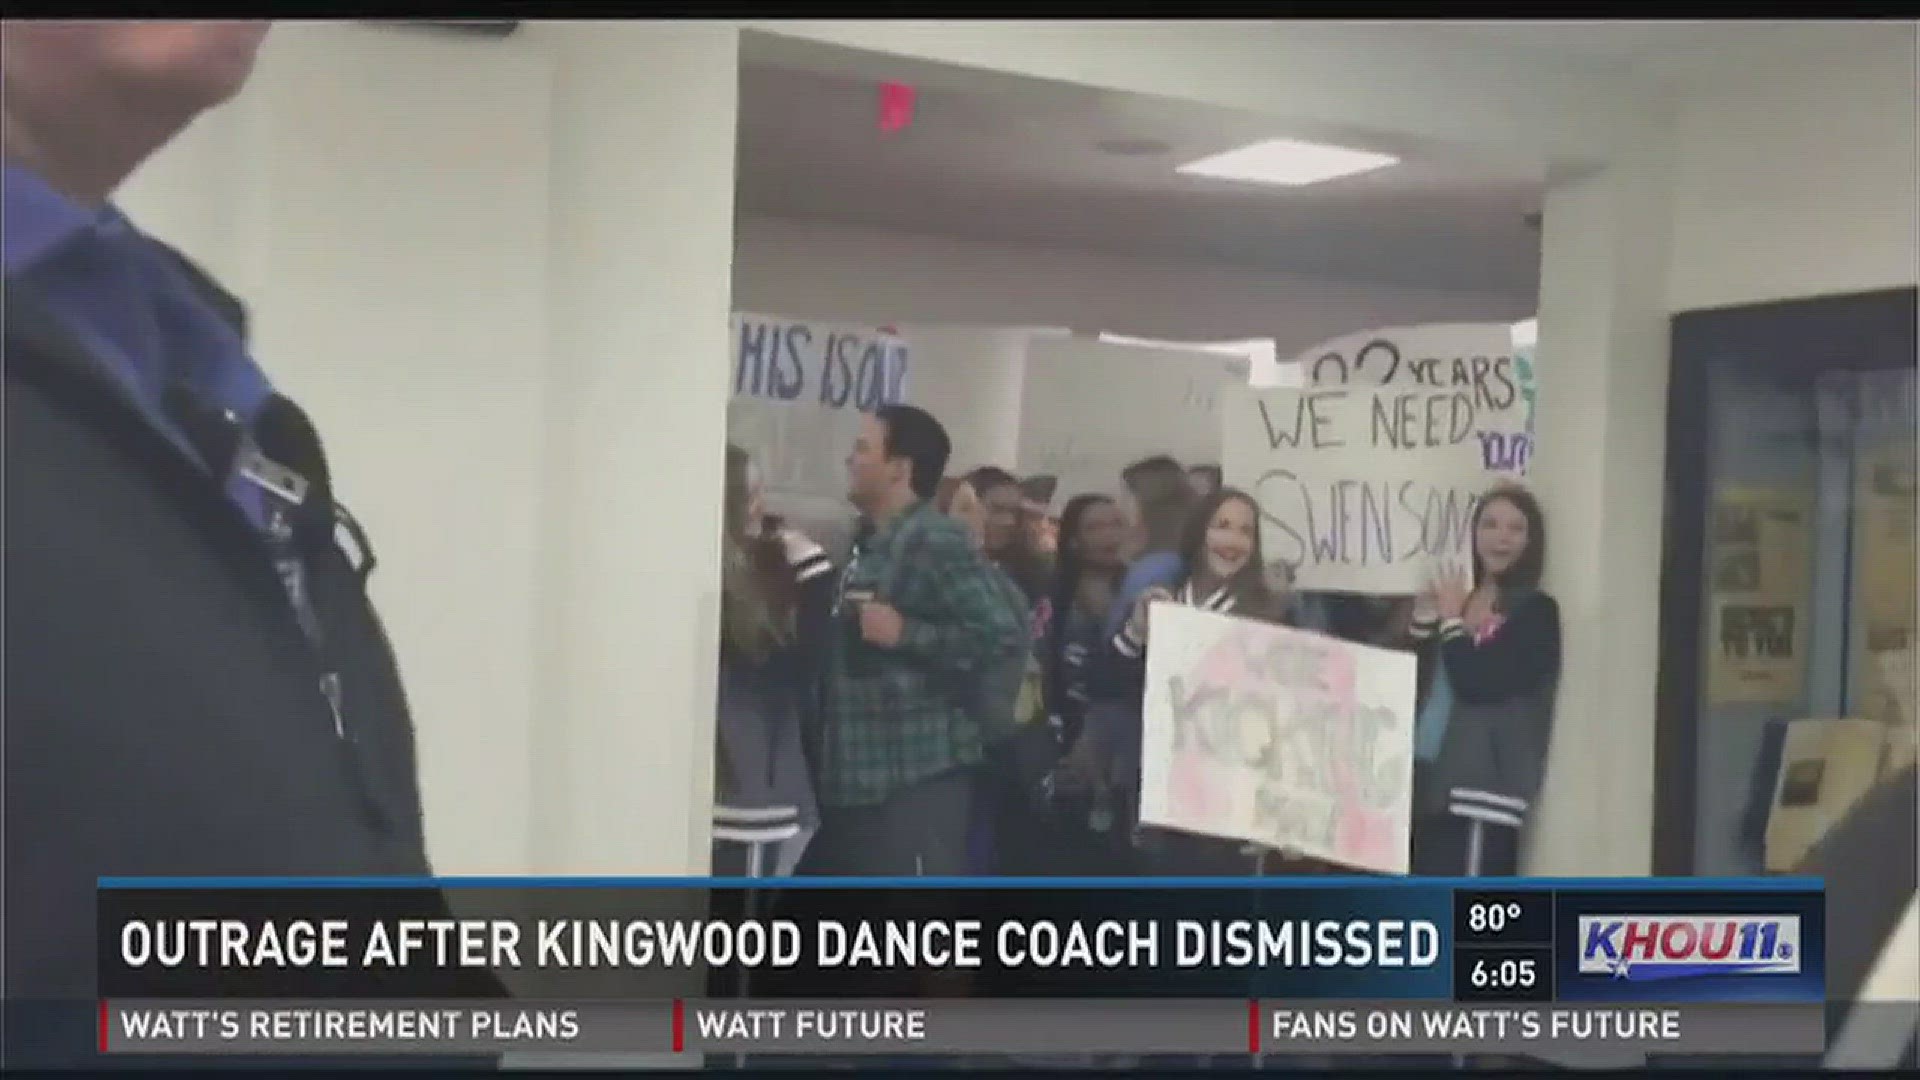 Many parents are speaking out after their children's coach was dismissed from the drill team. The coach has led the team for the last 22 years.